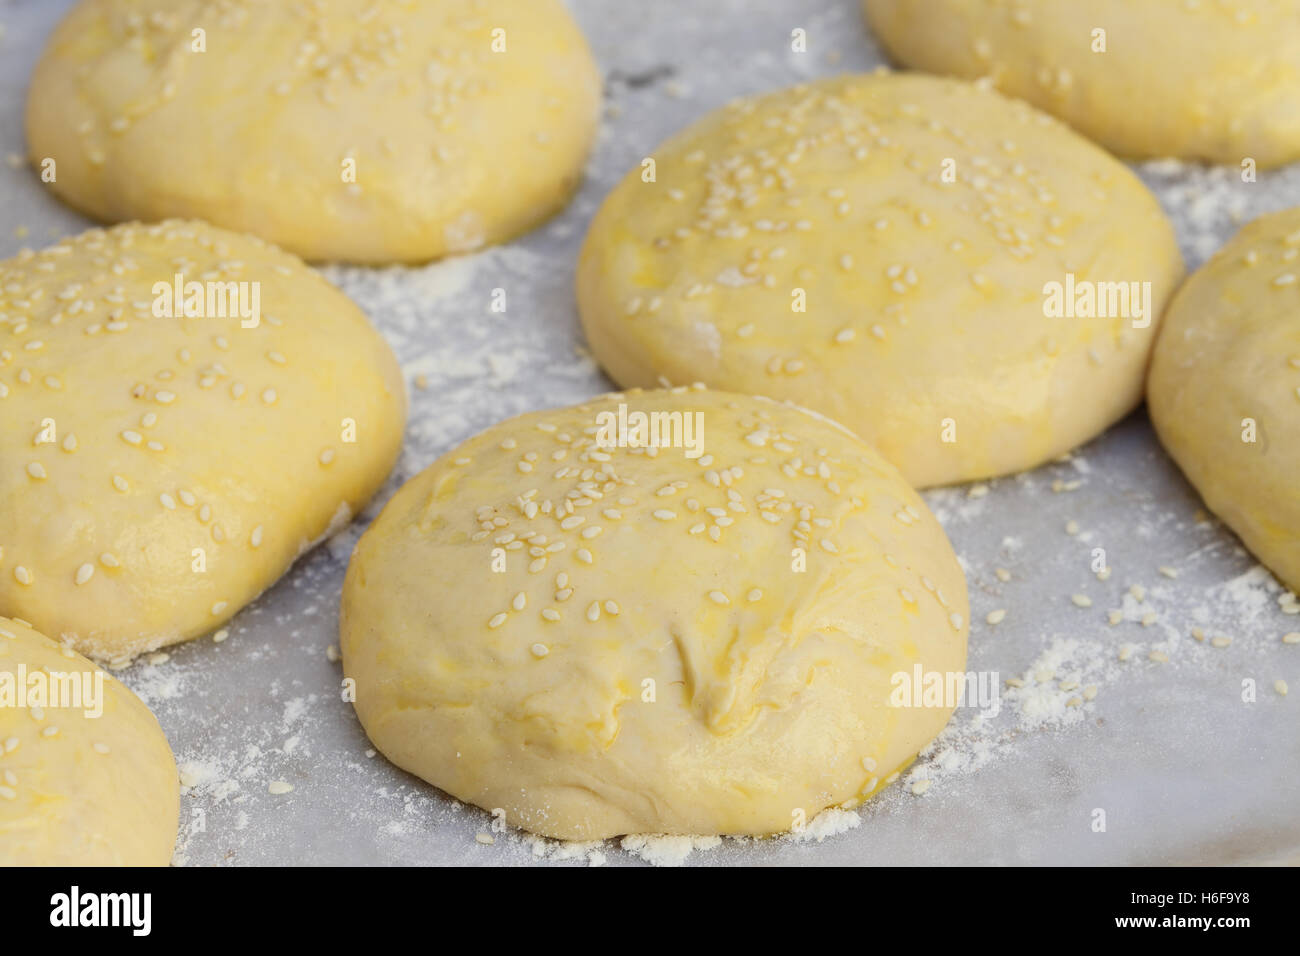 Burger-bun dough or batter ready for the oven, sprinkled with sesame seeds Stock Photo